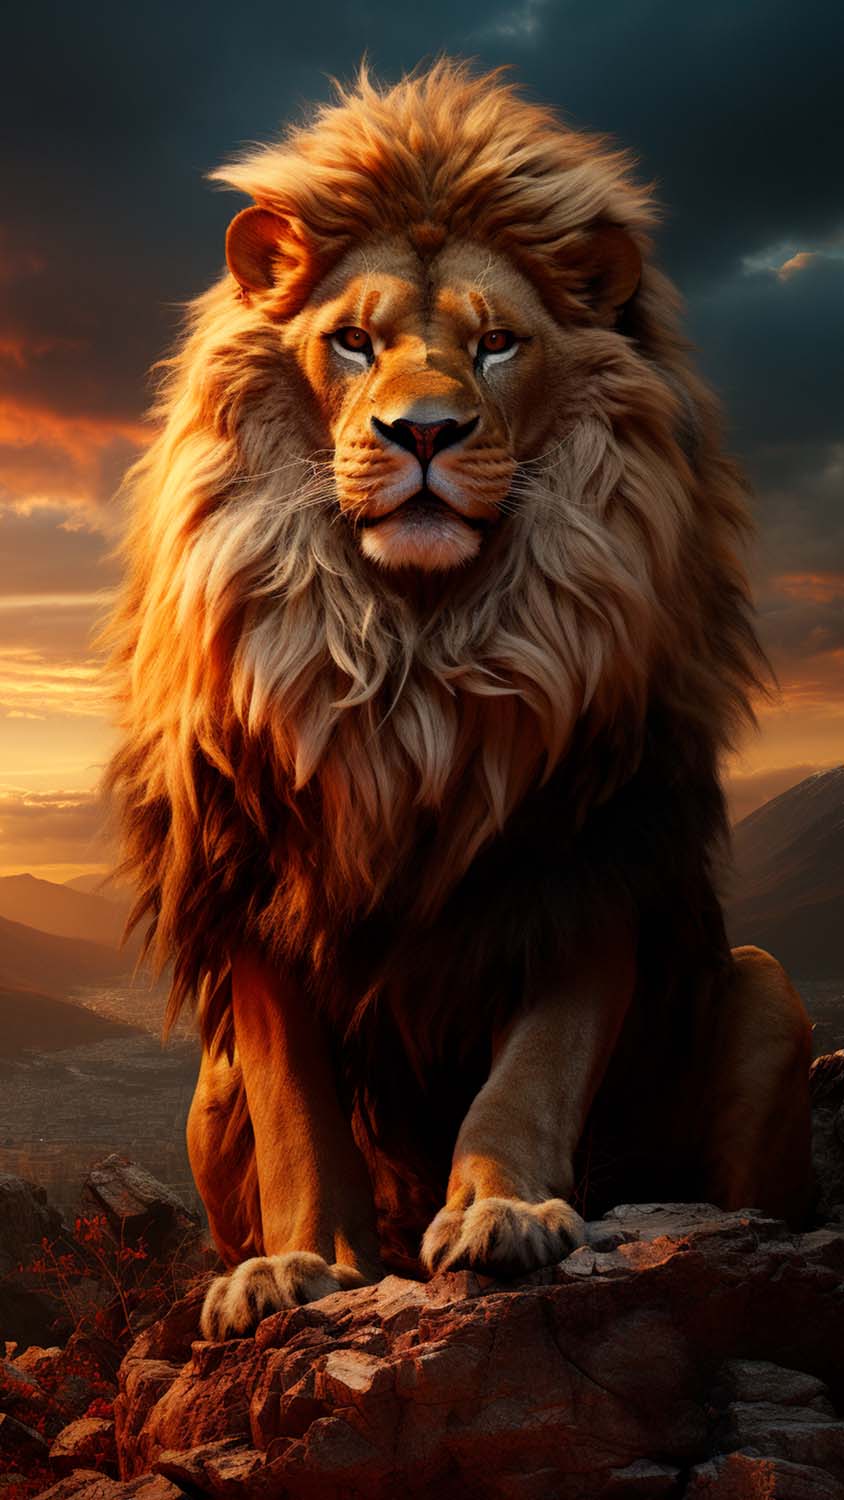 The Lion iPhone Wallpaper 4K